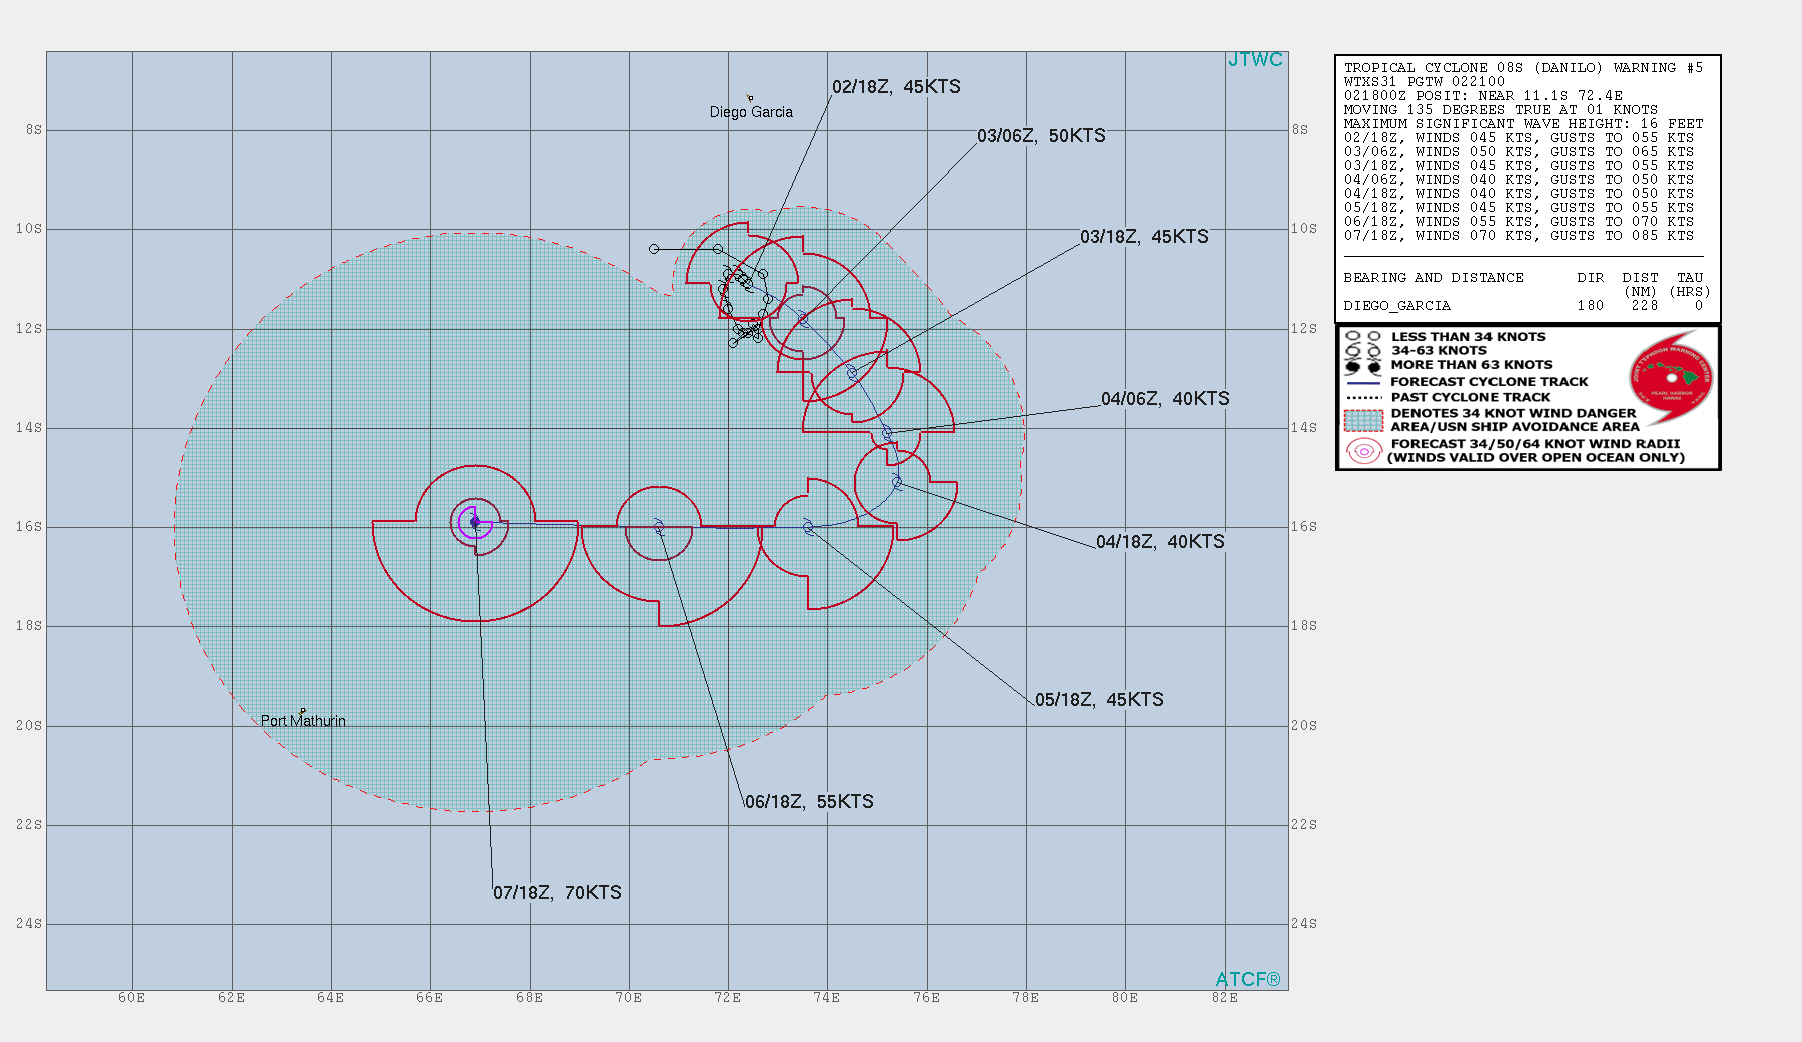 TC 08S: FORECAST TO REACH US/CATEGORY 1 BY 120H.